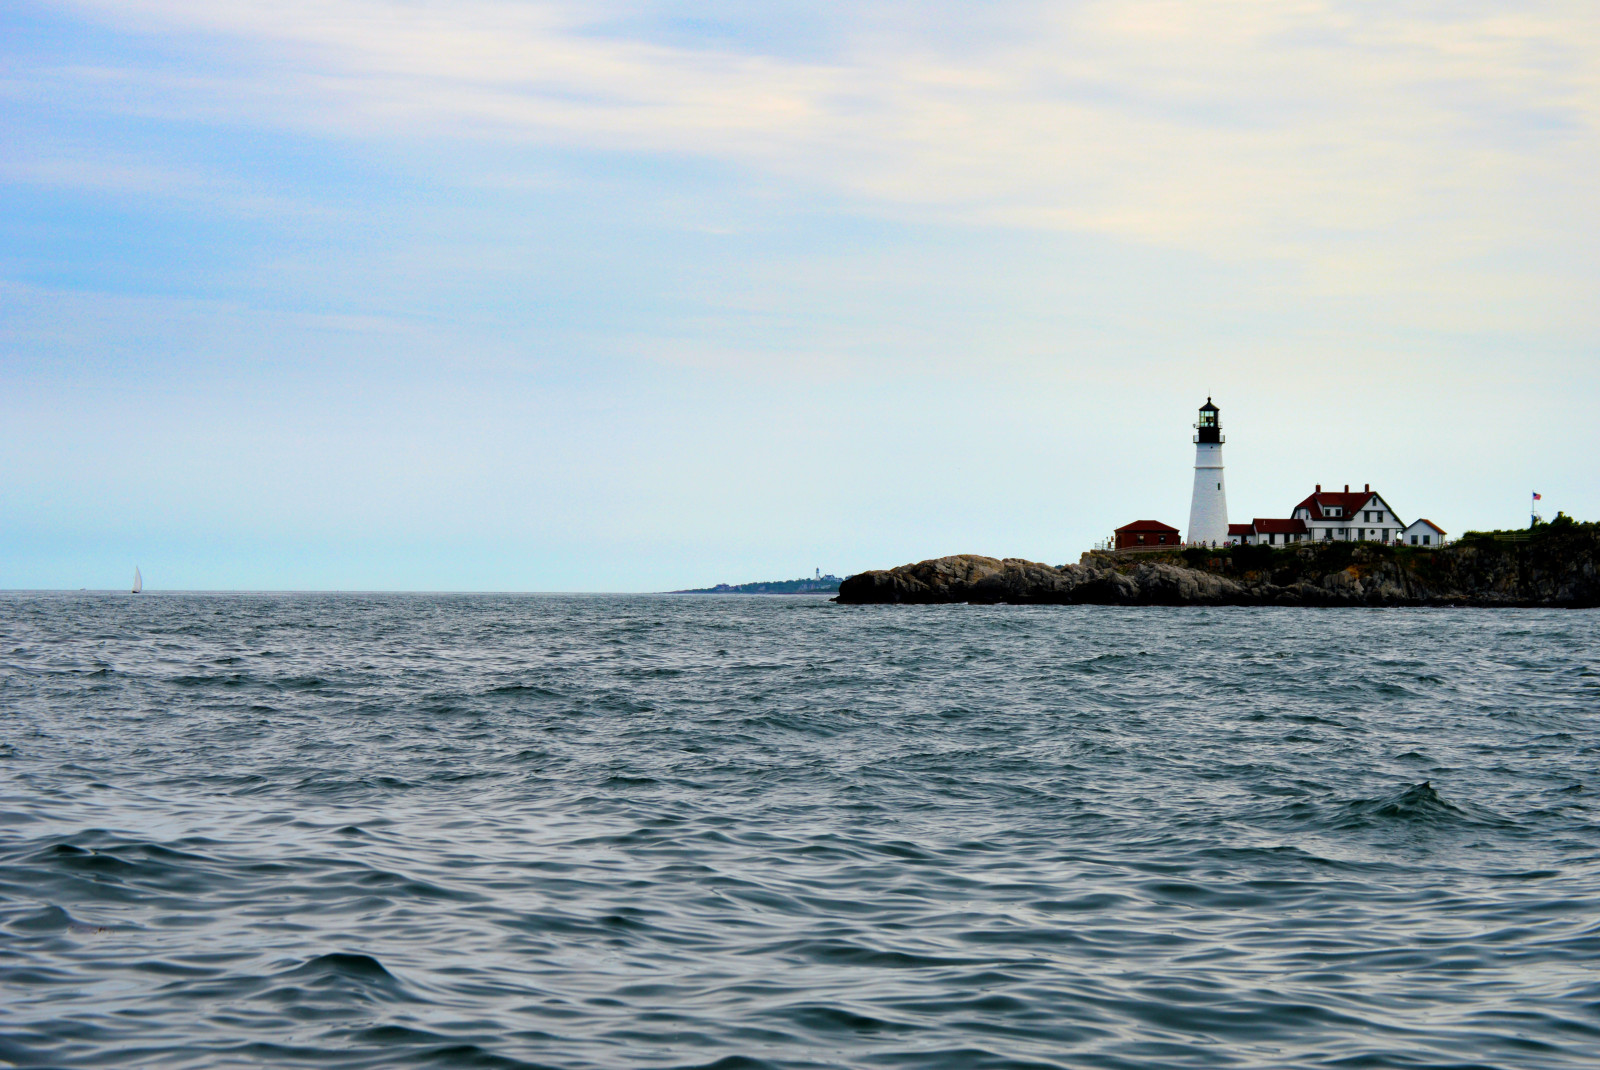 Lighthouse in Portland, Maine